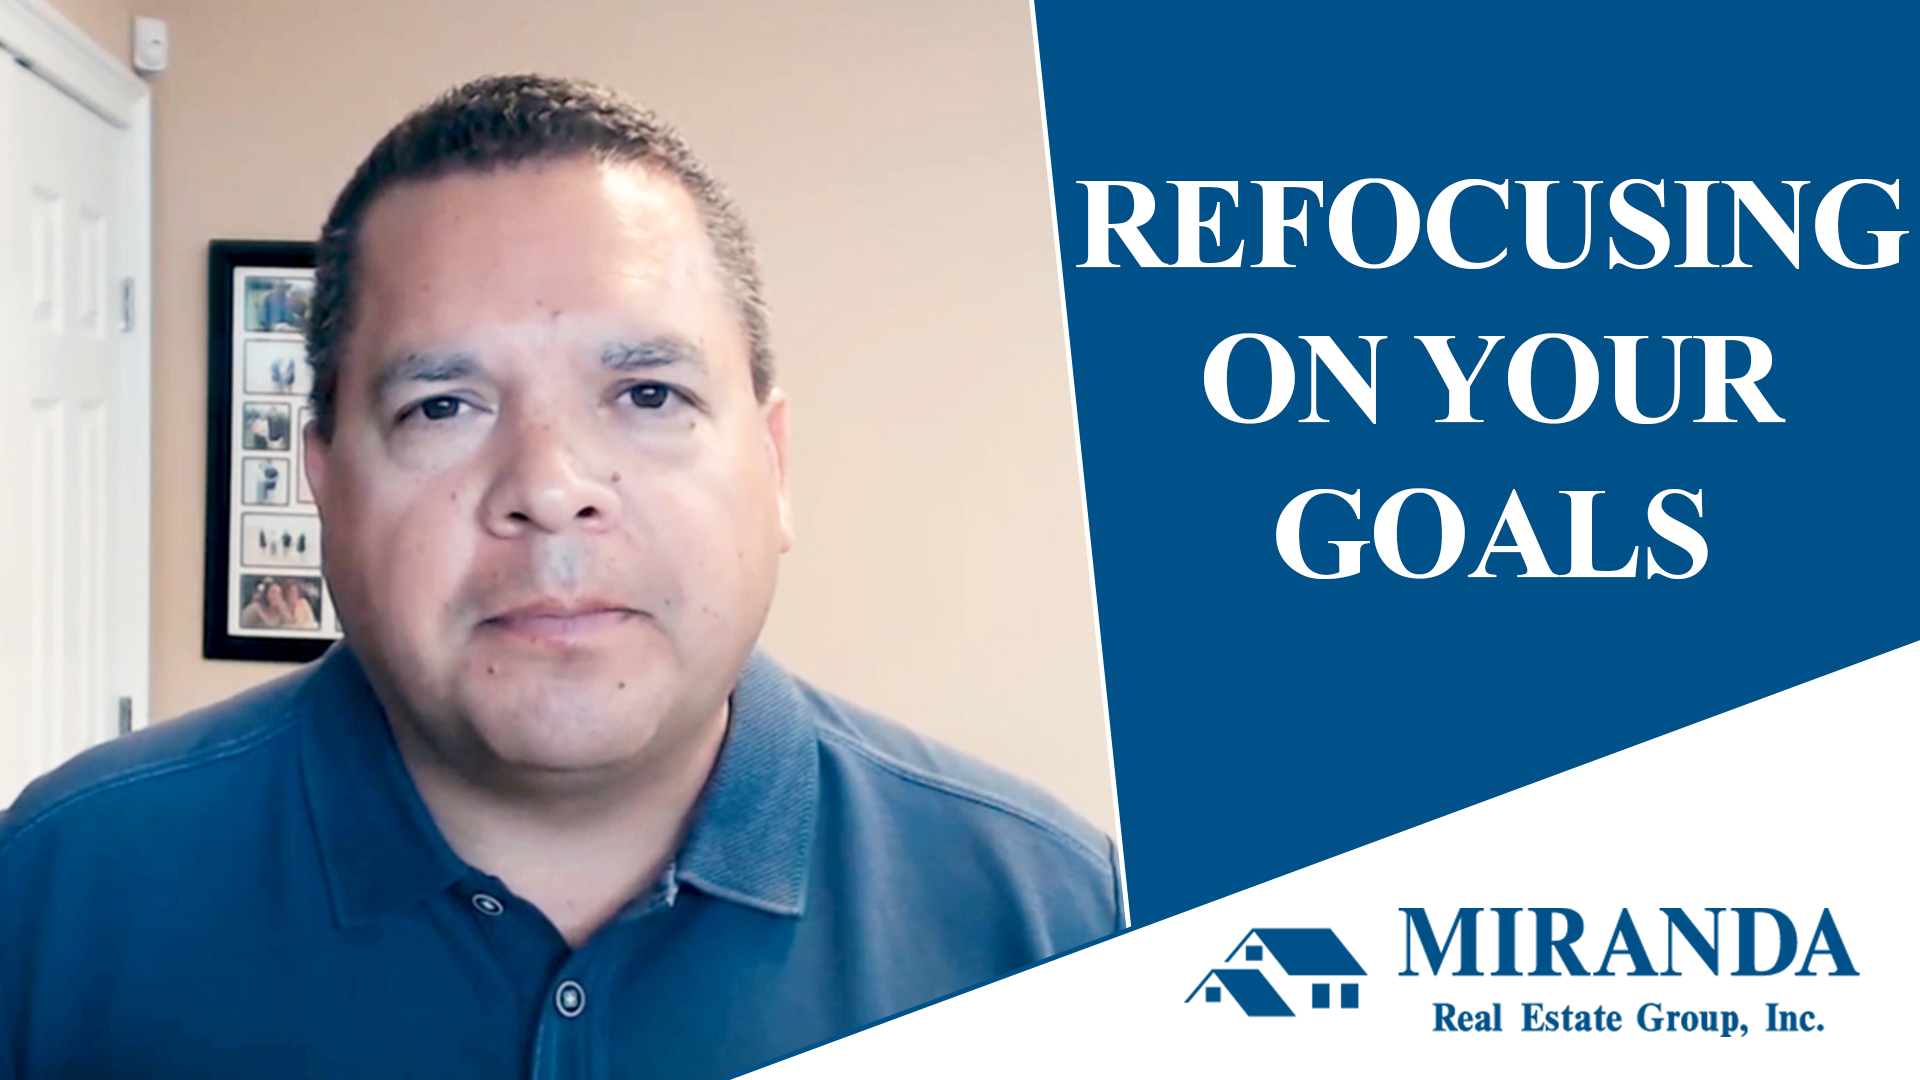 4 Goal Categories to Refocus on During Q2